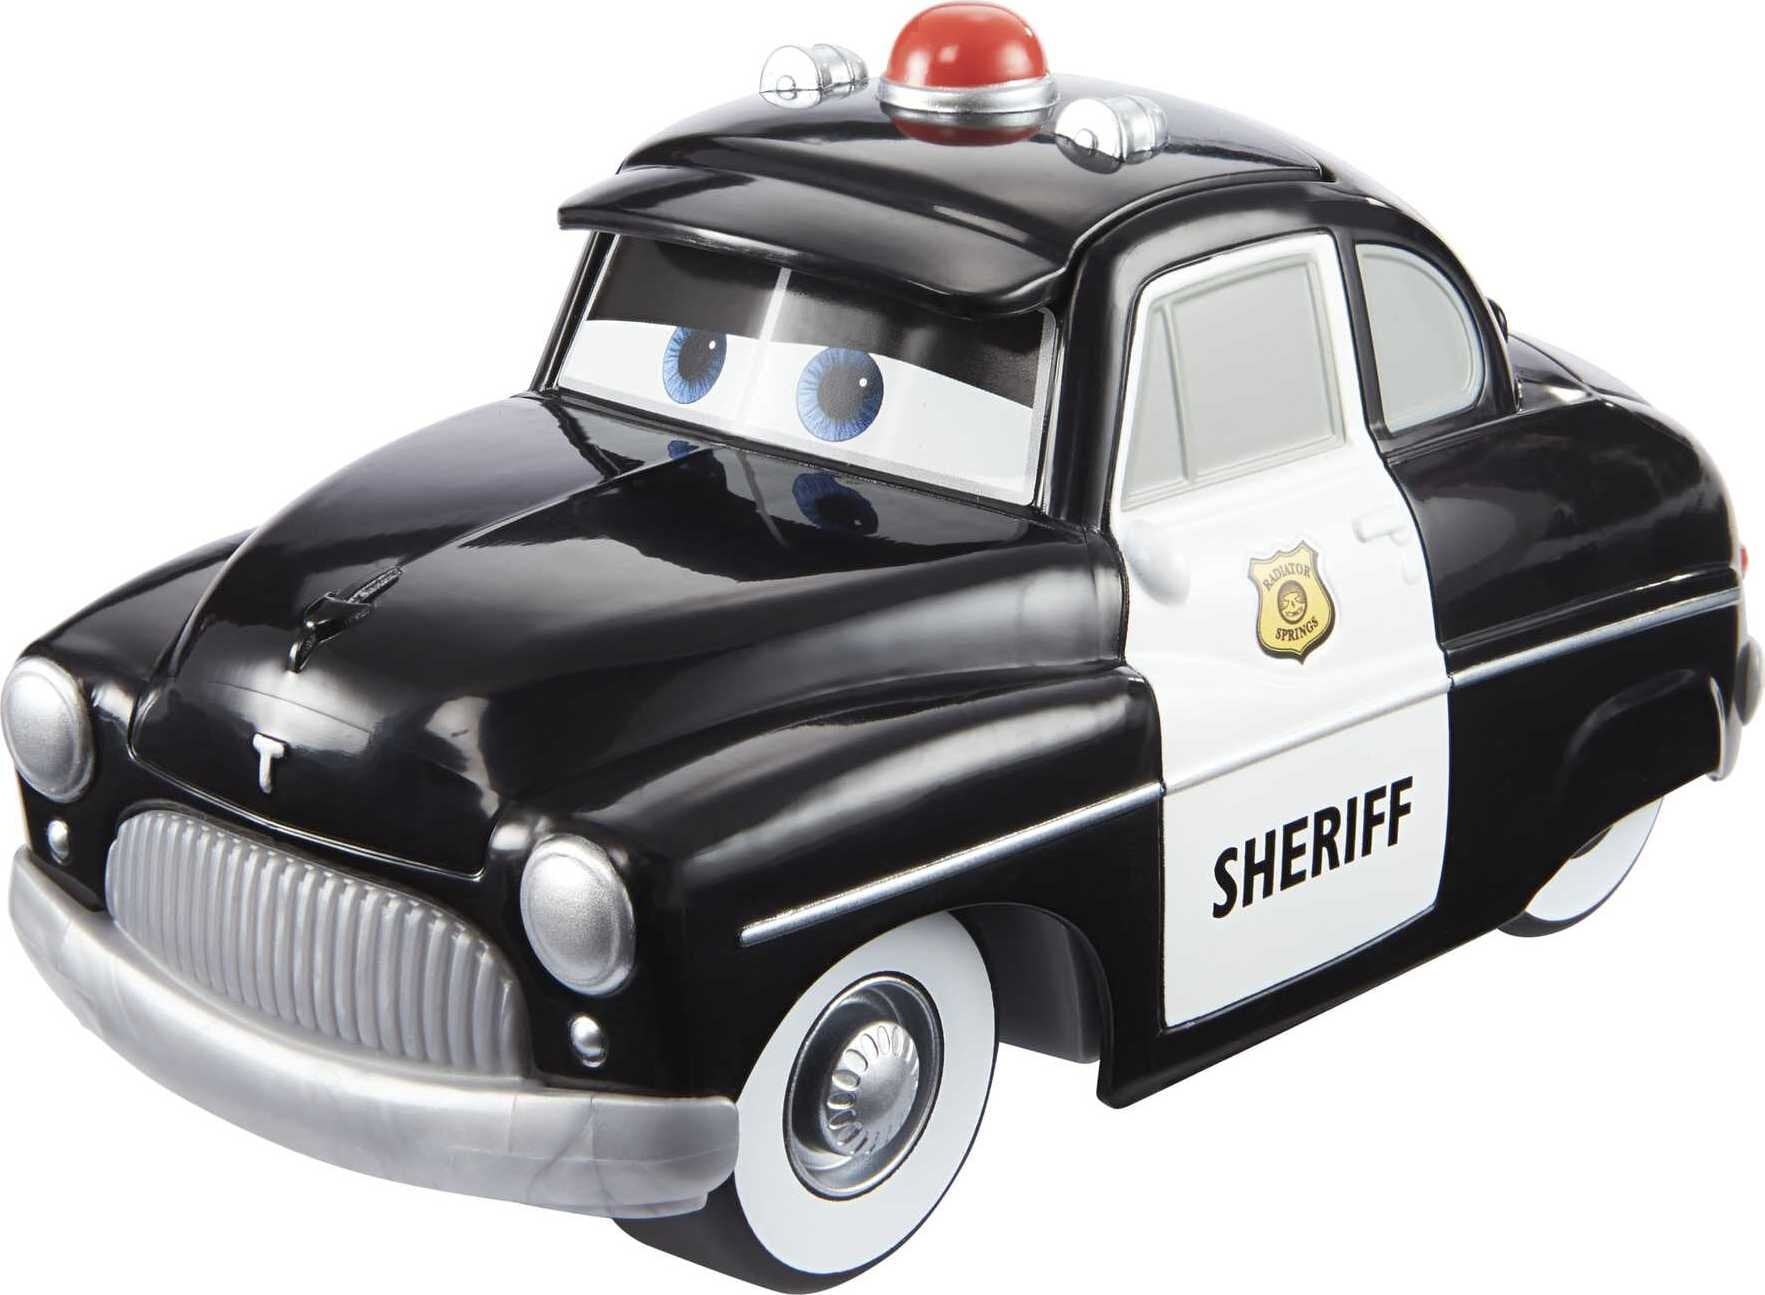 Collectible Character Car Disney Pixar Cars Track Talkers Sheriff Vehicle 5.5-in Talking Movie Toy with Sound Effects Gift for Kids & Collectors Ages 3 Years Old & Up 